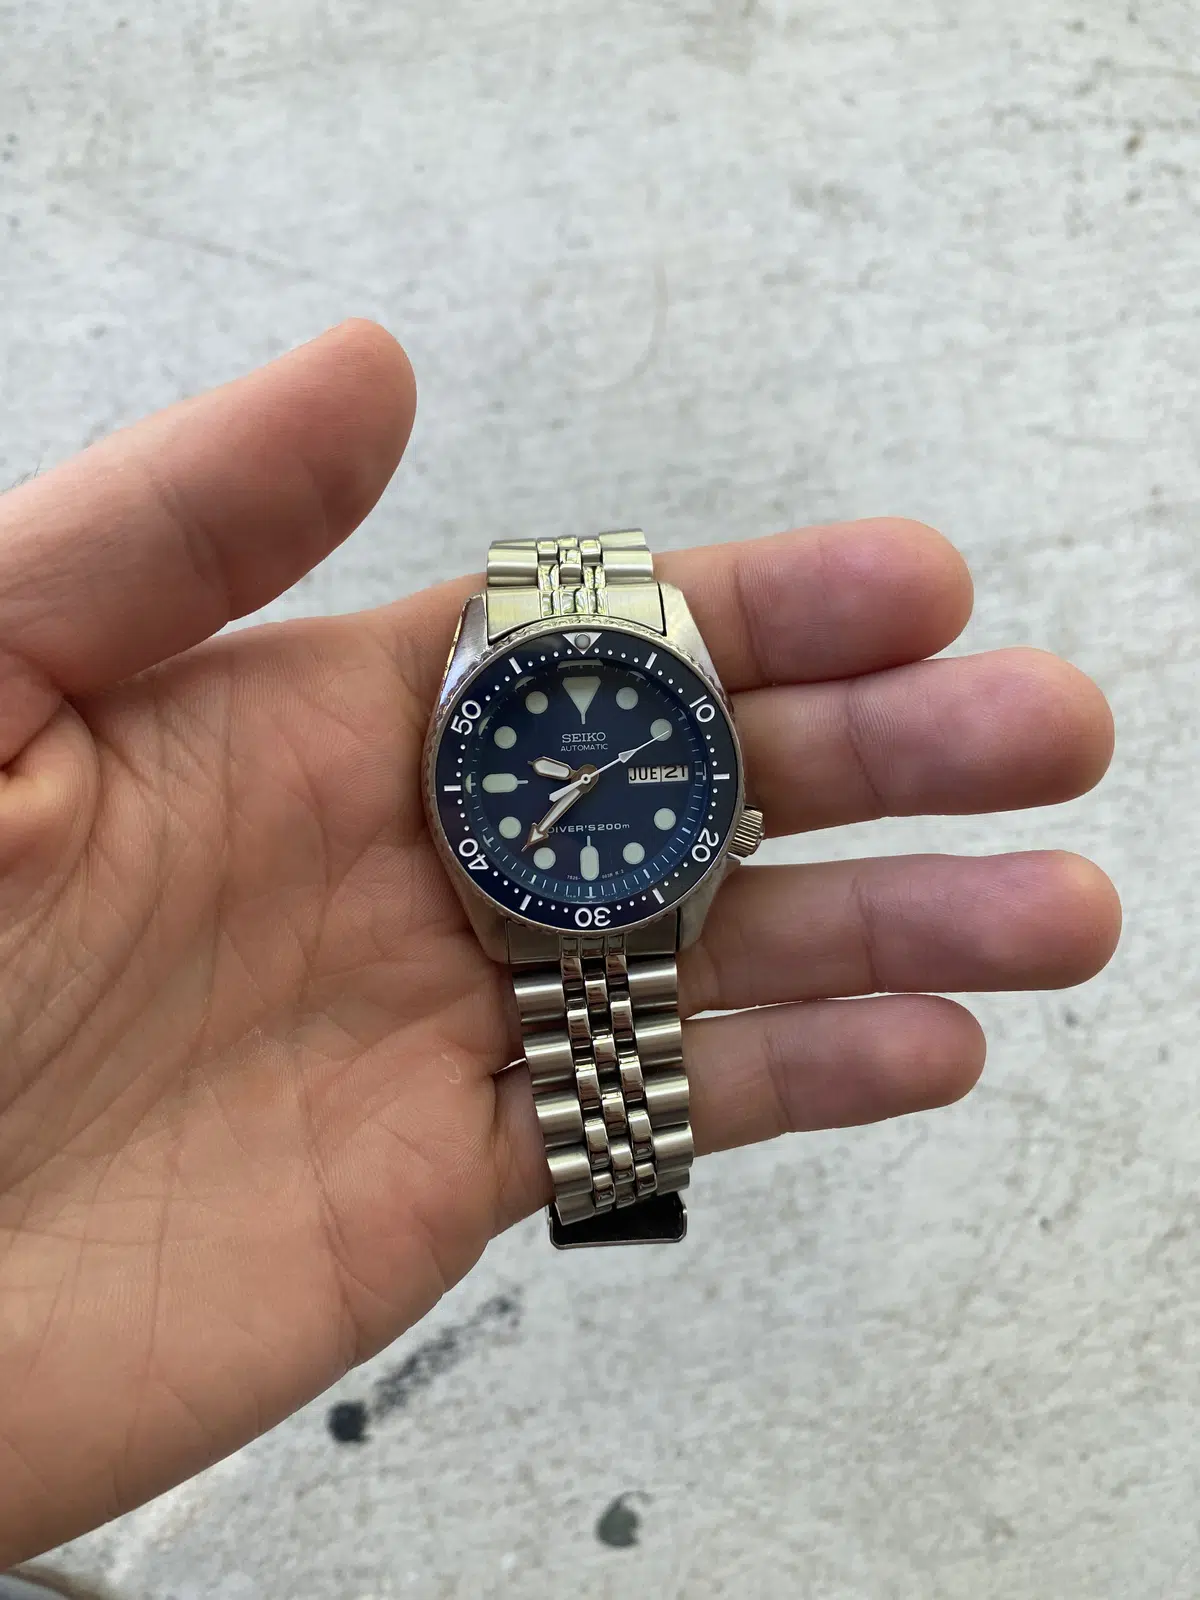 Seiko SKX013 with blue dial and bezel insert